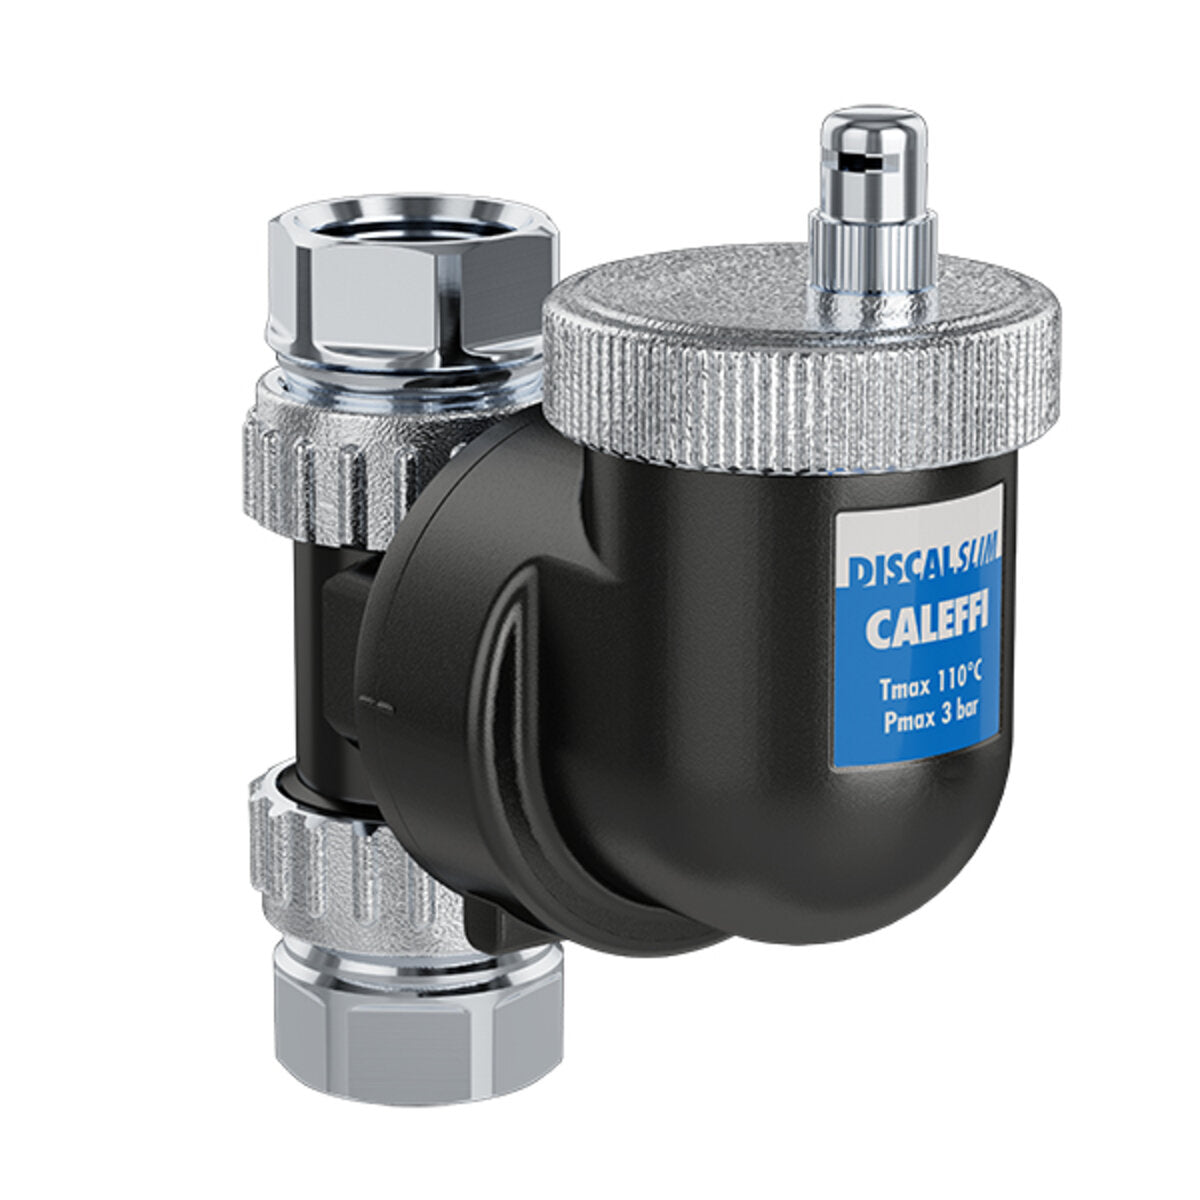 Caleffi discalslim deaerator with 3/4" f threaded connections for horizontal or vertical installation